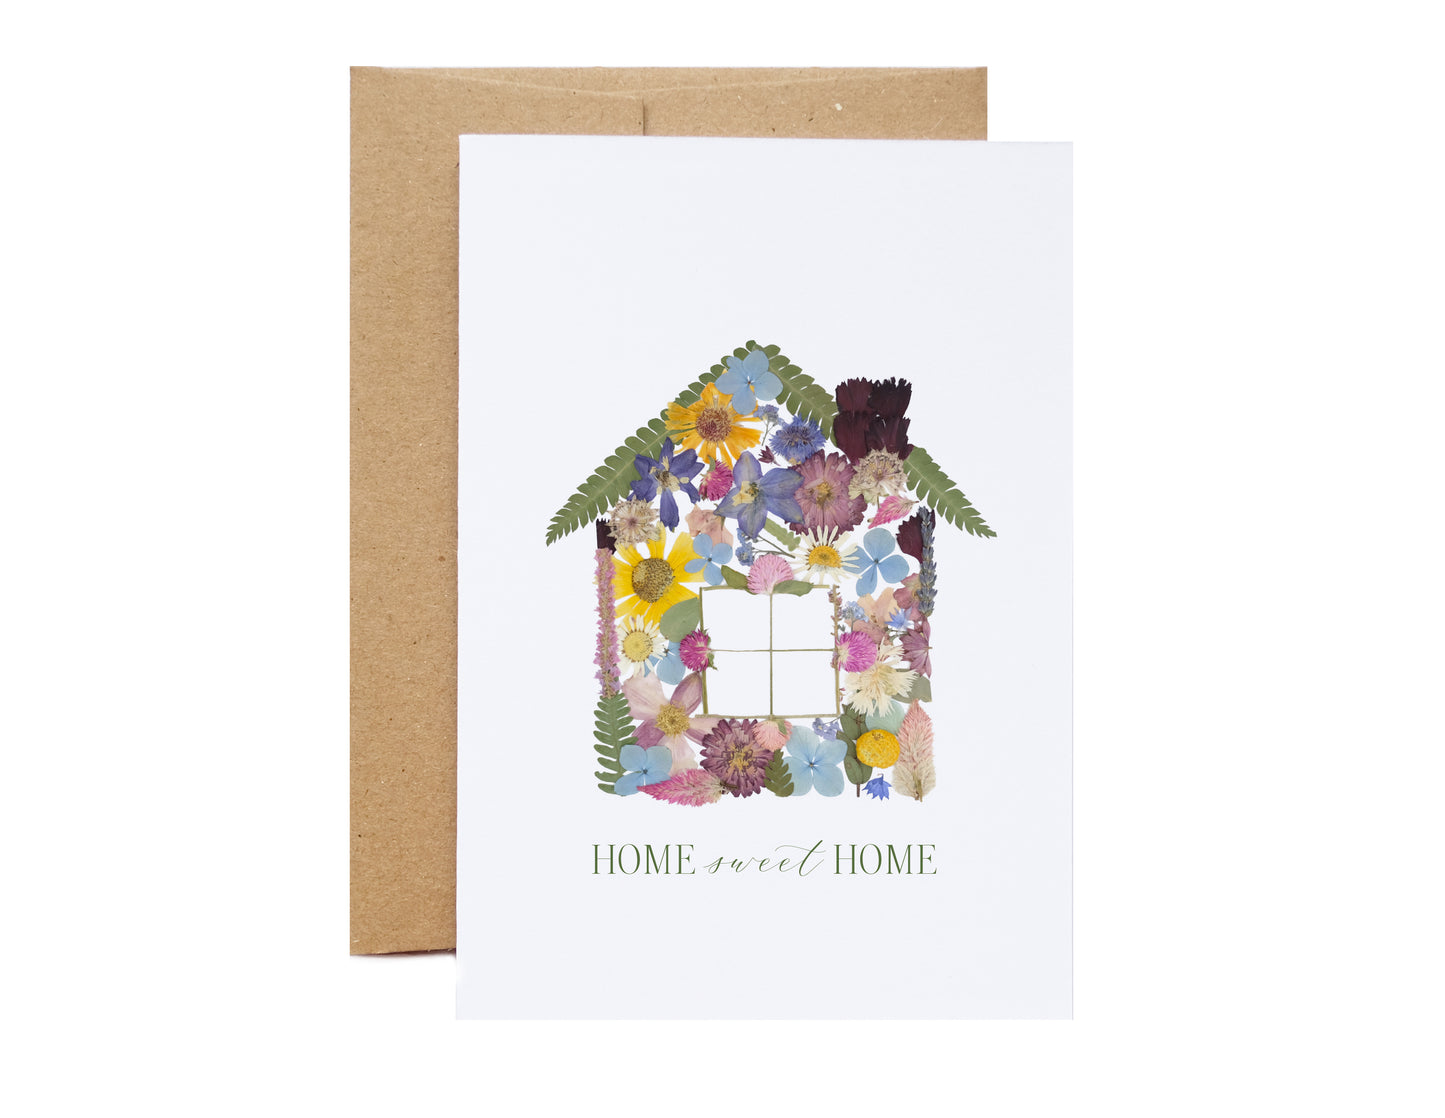 home sweet home card, cute house artwork, designed with pressed flowers